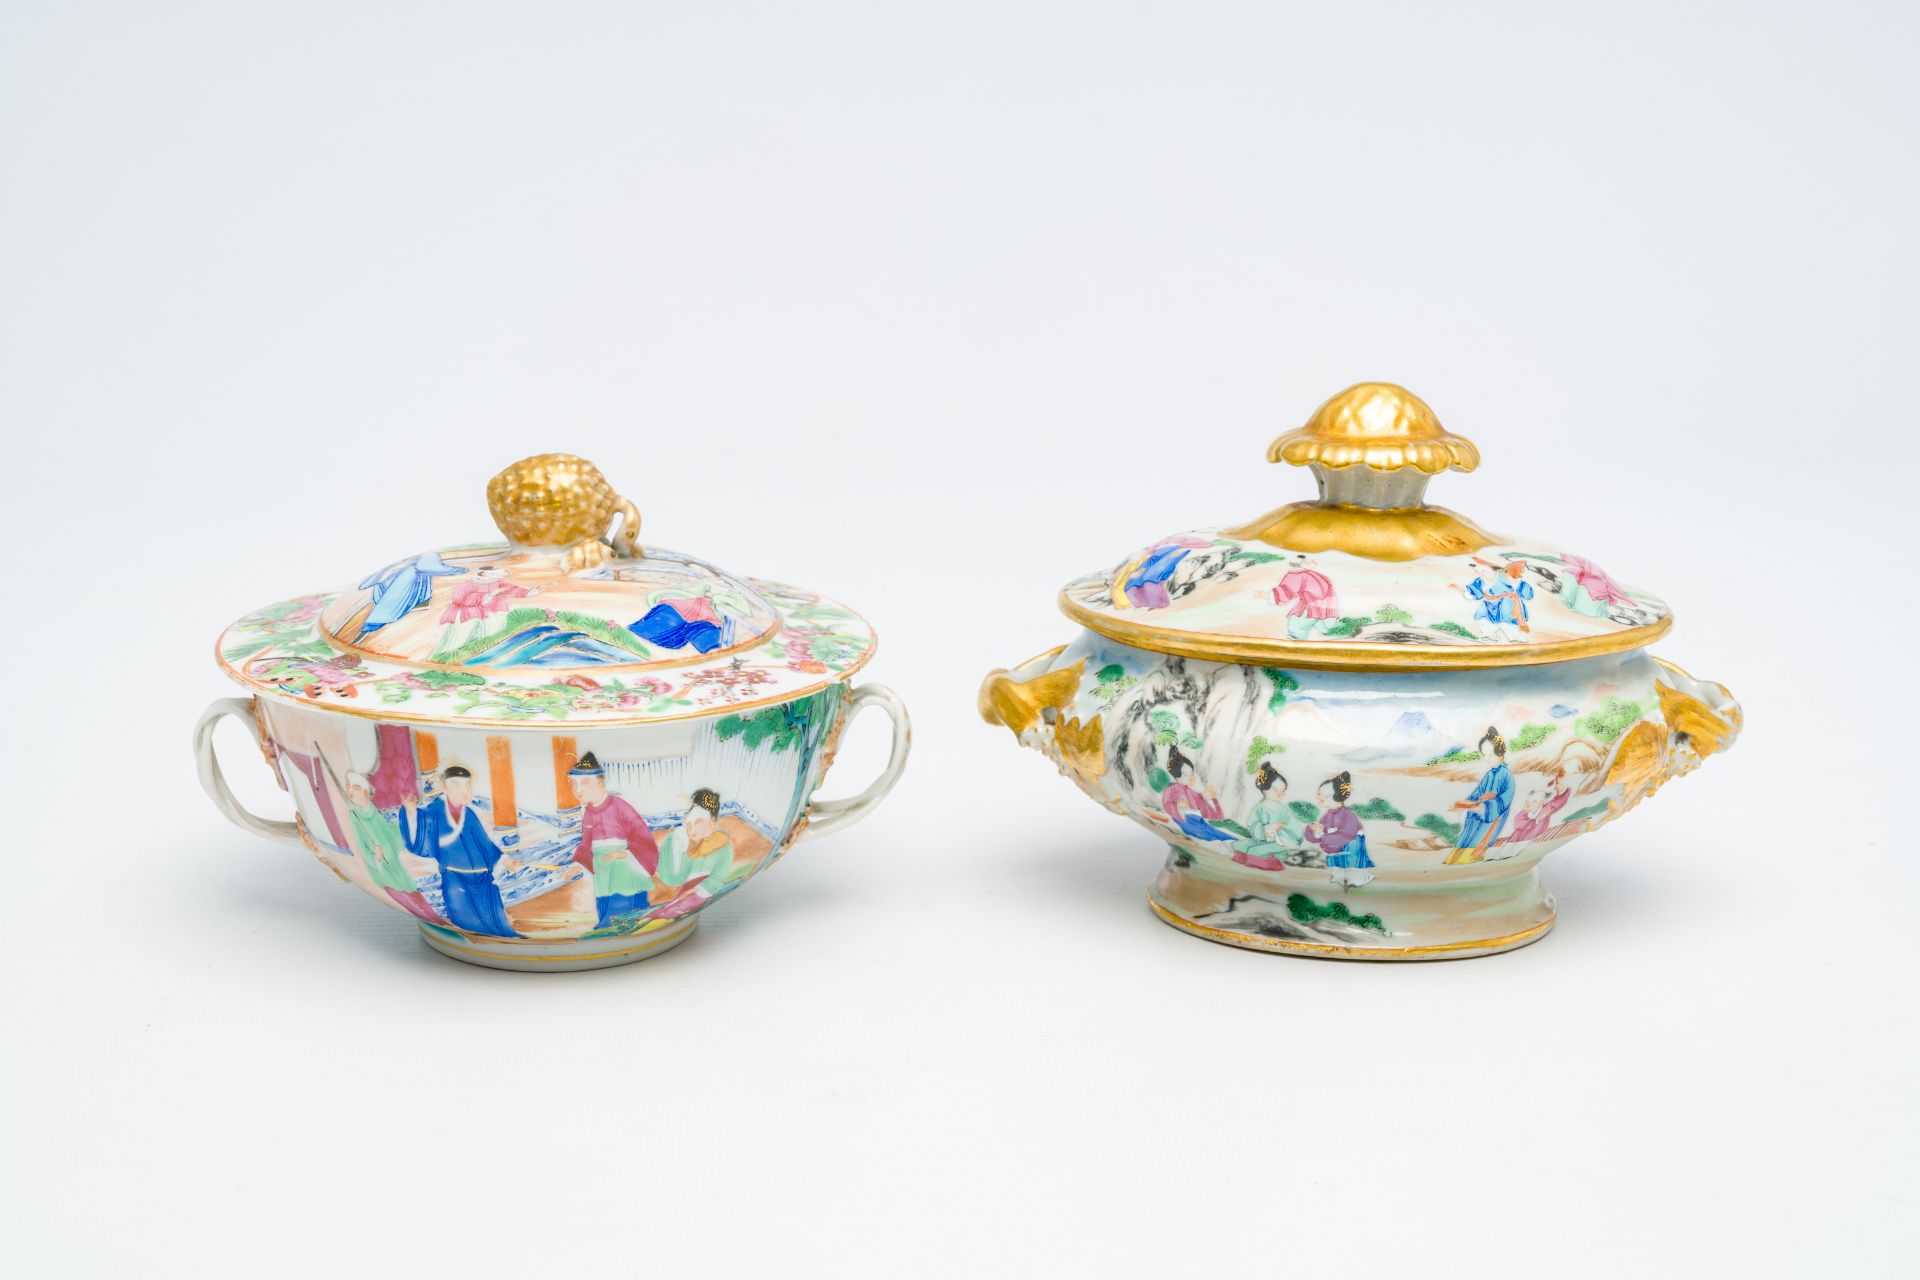 A Chinese Canton famille rose bowl and cover with palace scenes and a tureen and cover with playing